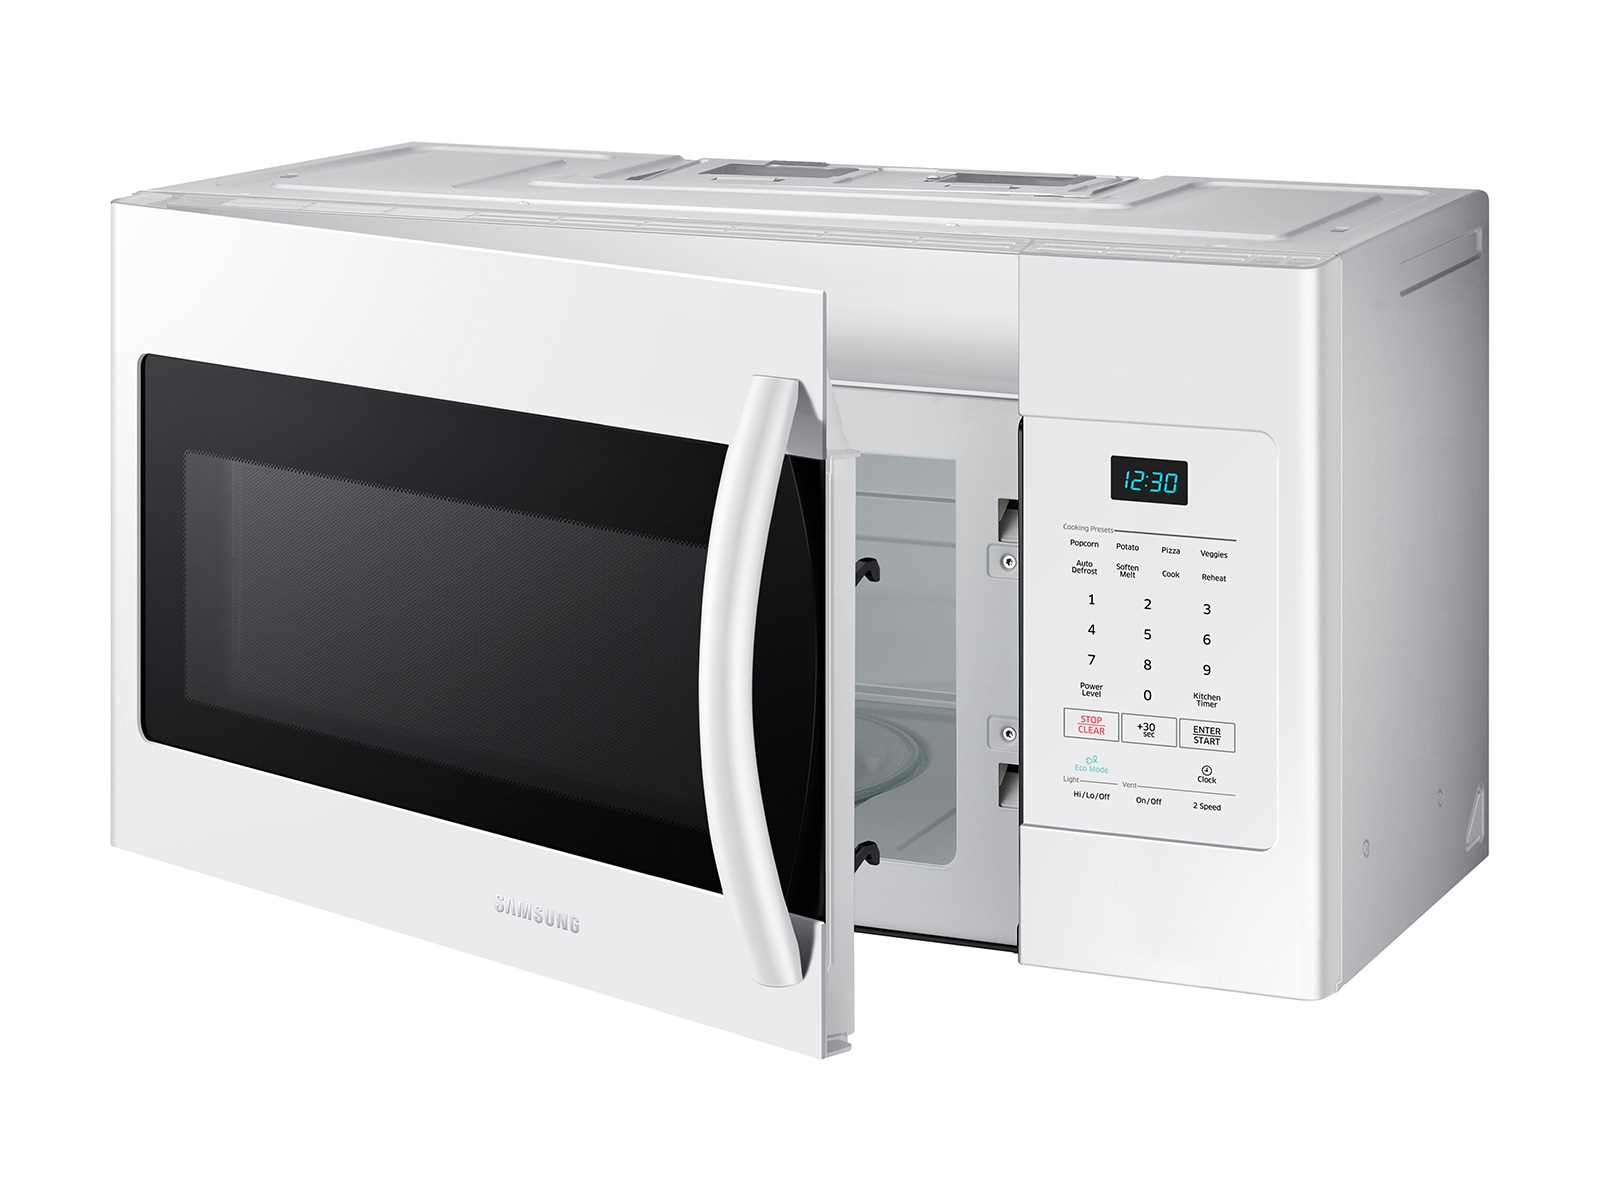 https://image-us.samsung.com/SamsungUS/home/home-appliances/microwaves/over-the-range/pdp/me16h702sew/gallery/09_Microwave_OTR_ME16H702SEW_R-Perspective-Open_White.jpg?$product-details-jpg$